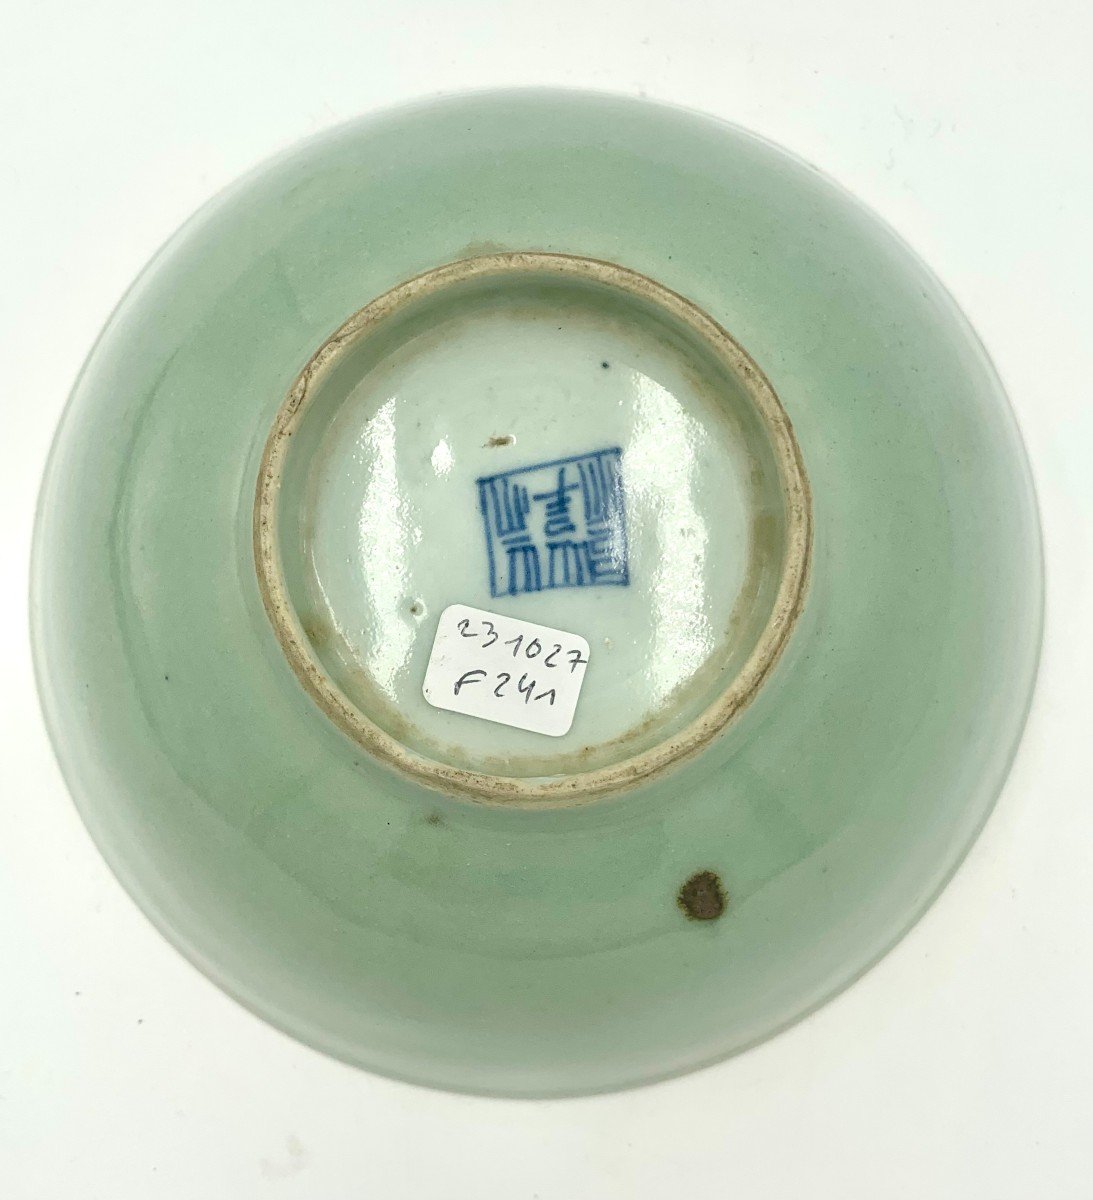  Cup - Celadon Porcelain - China - Early 19th Century-photo-3